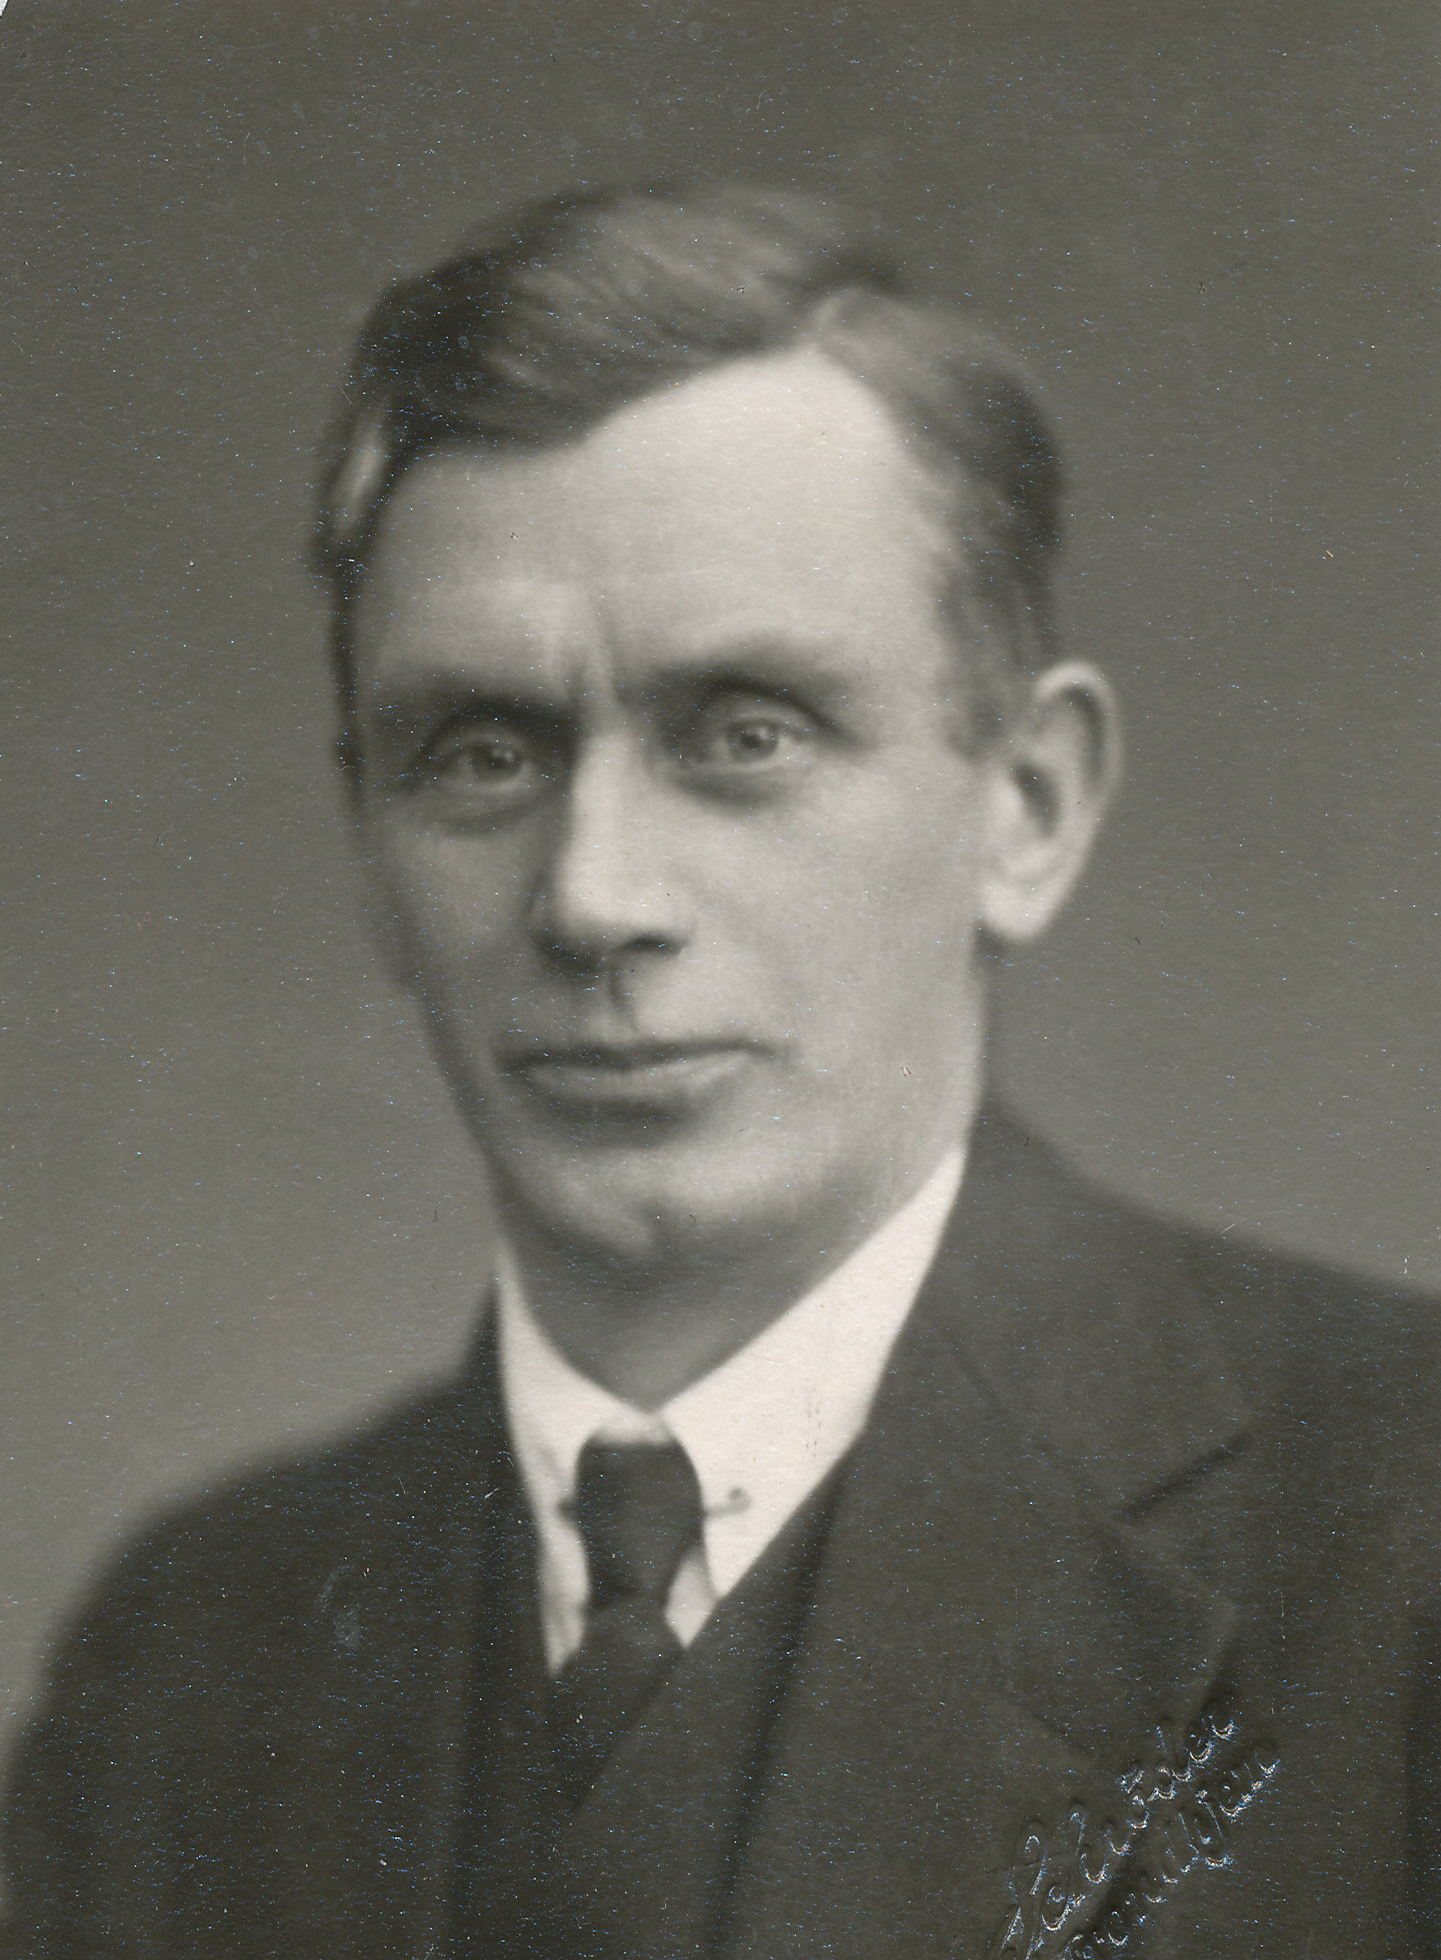 an old black and white po shows a man wearing a suit and tie